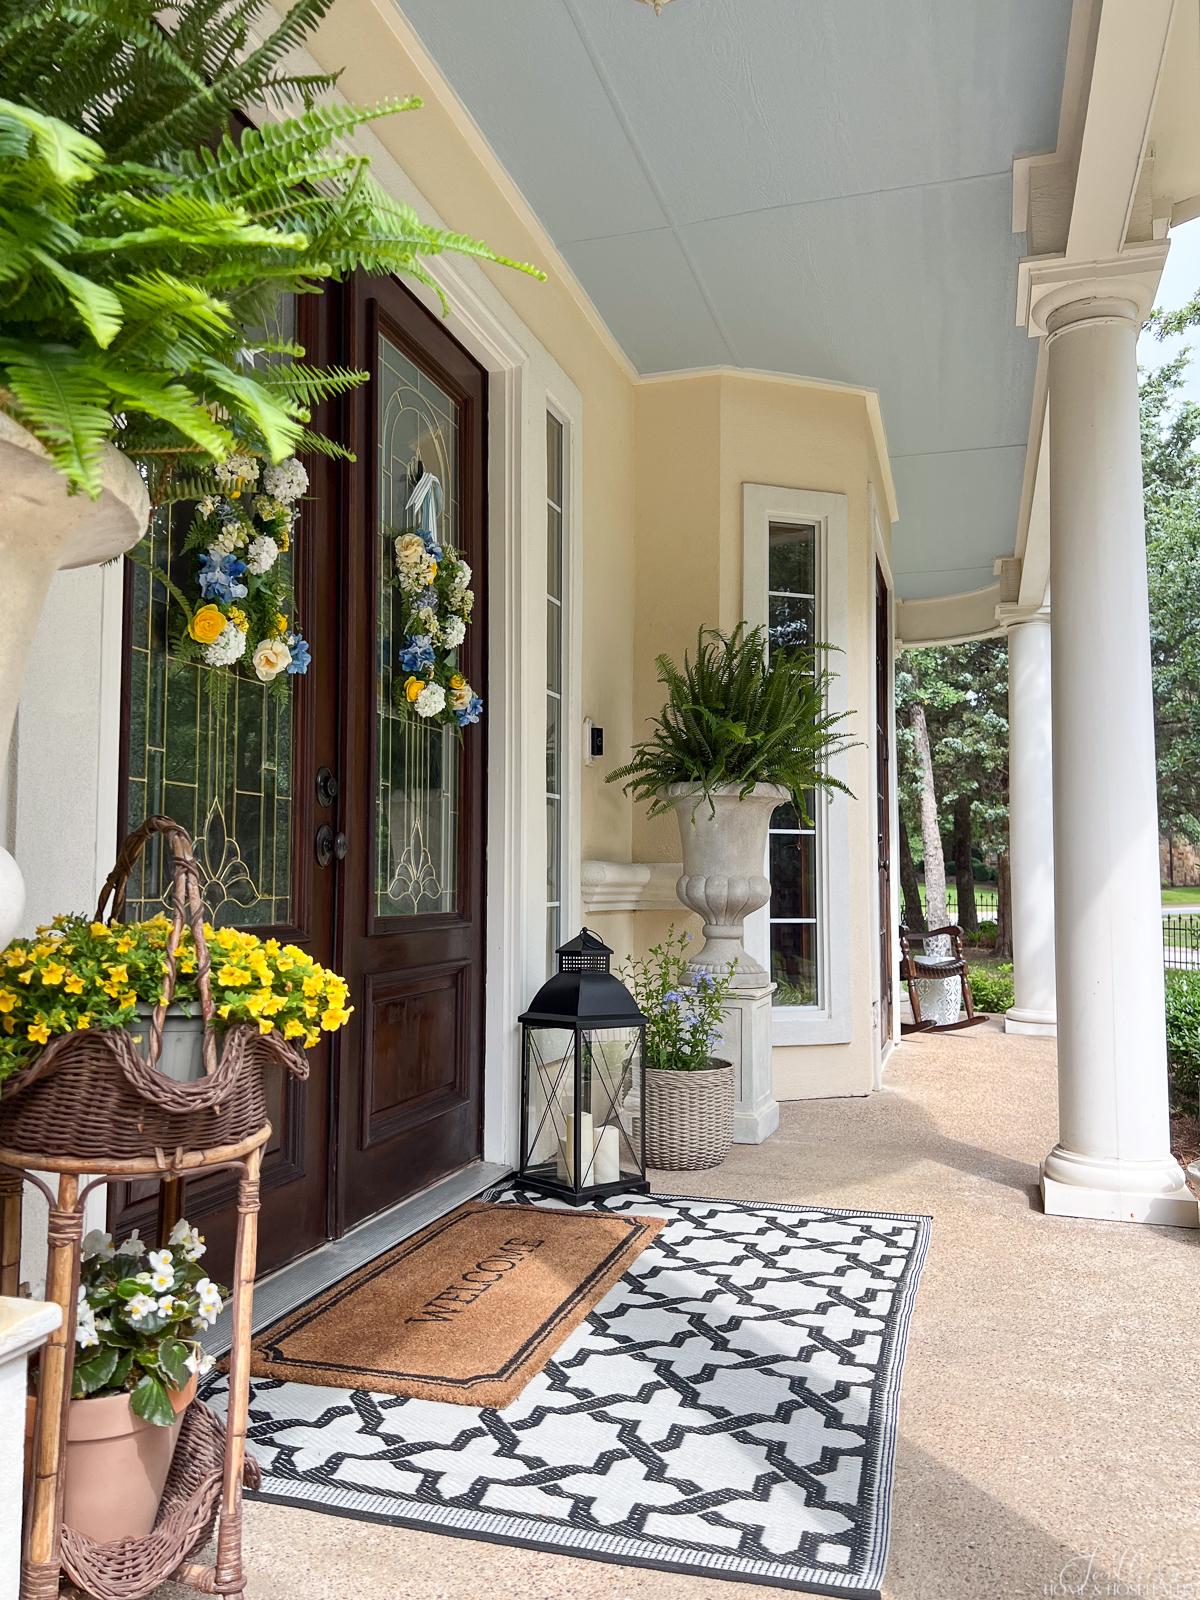 15 Southern Porch and Patio Decorating Ideas and Tour